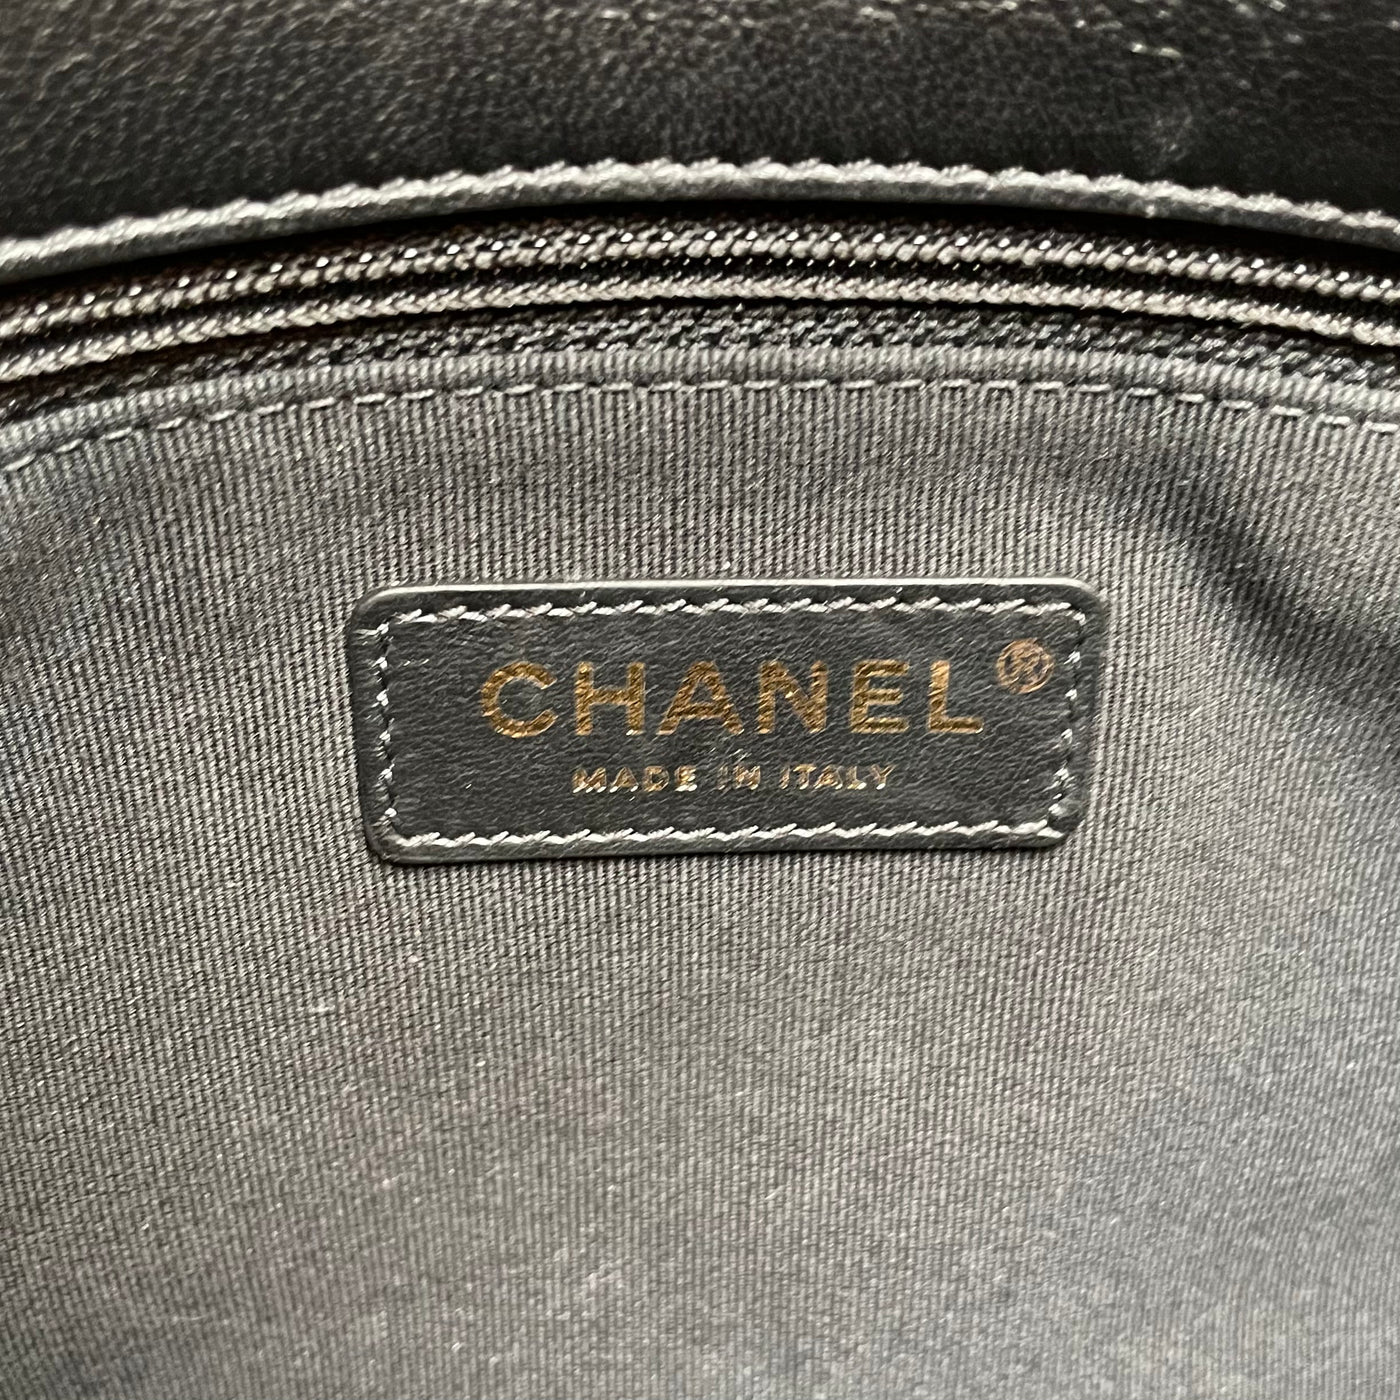 CHANEL On And On Flap Bag - Black